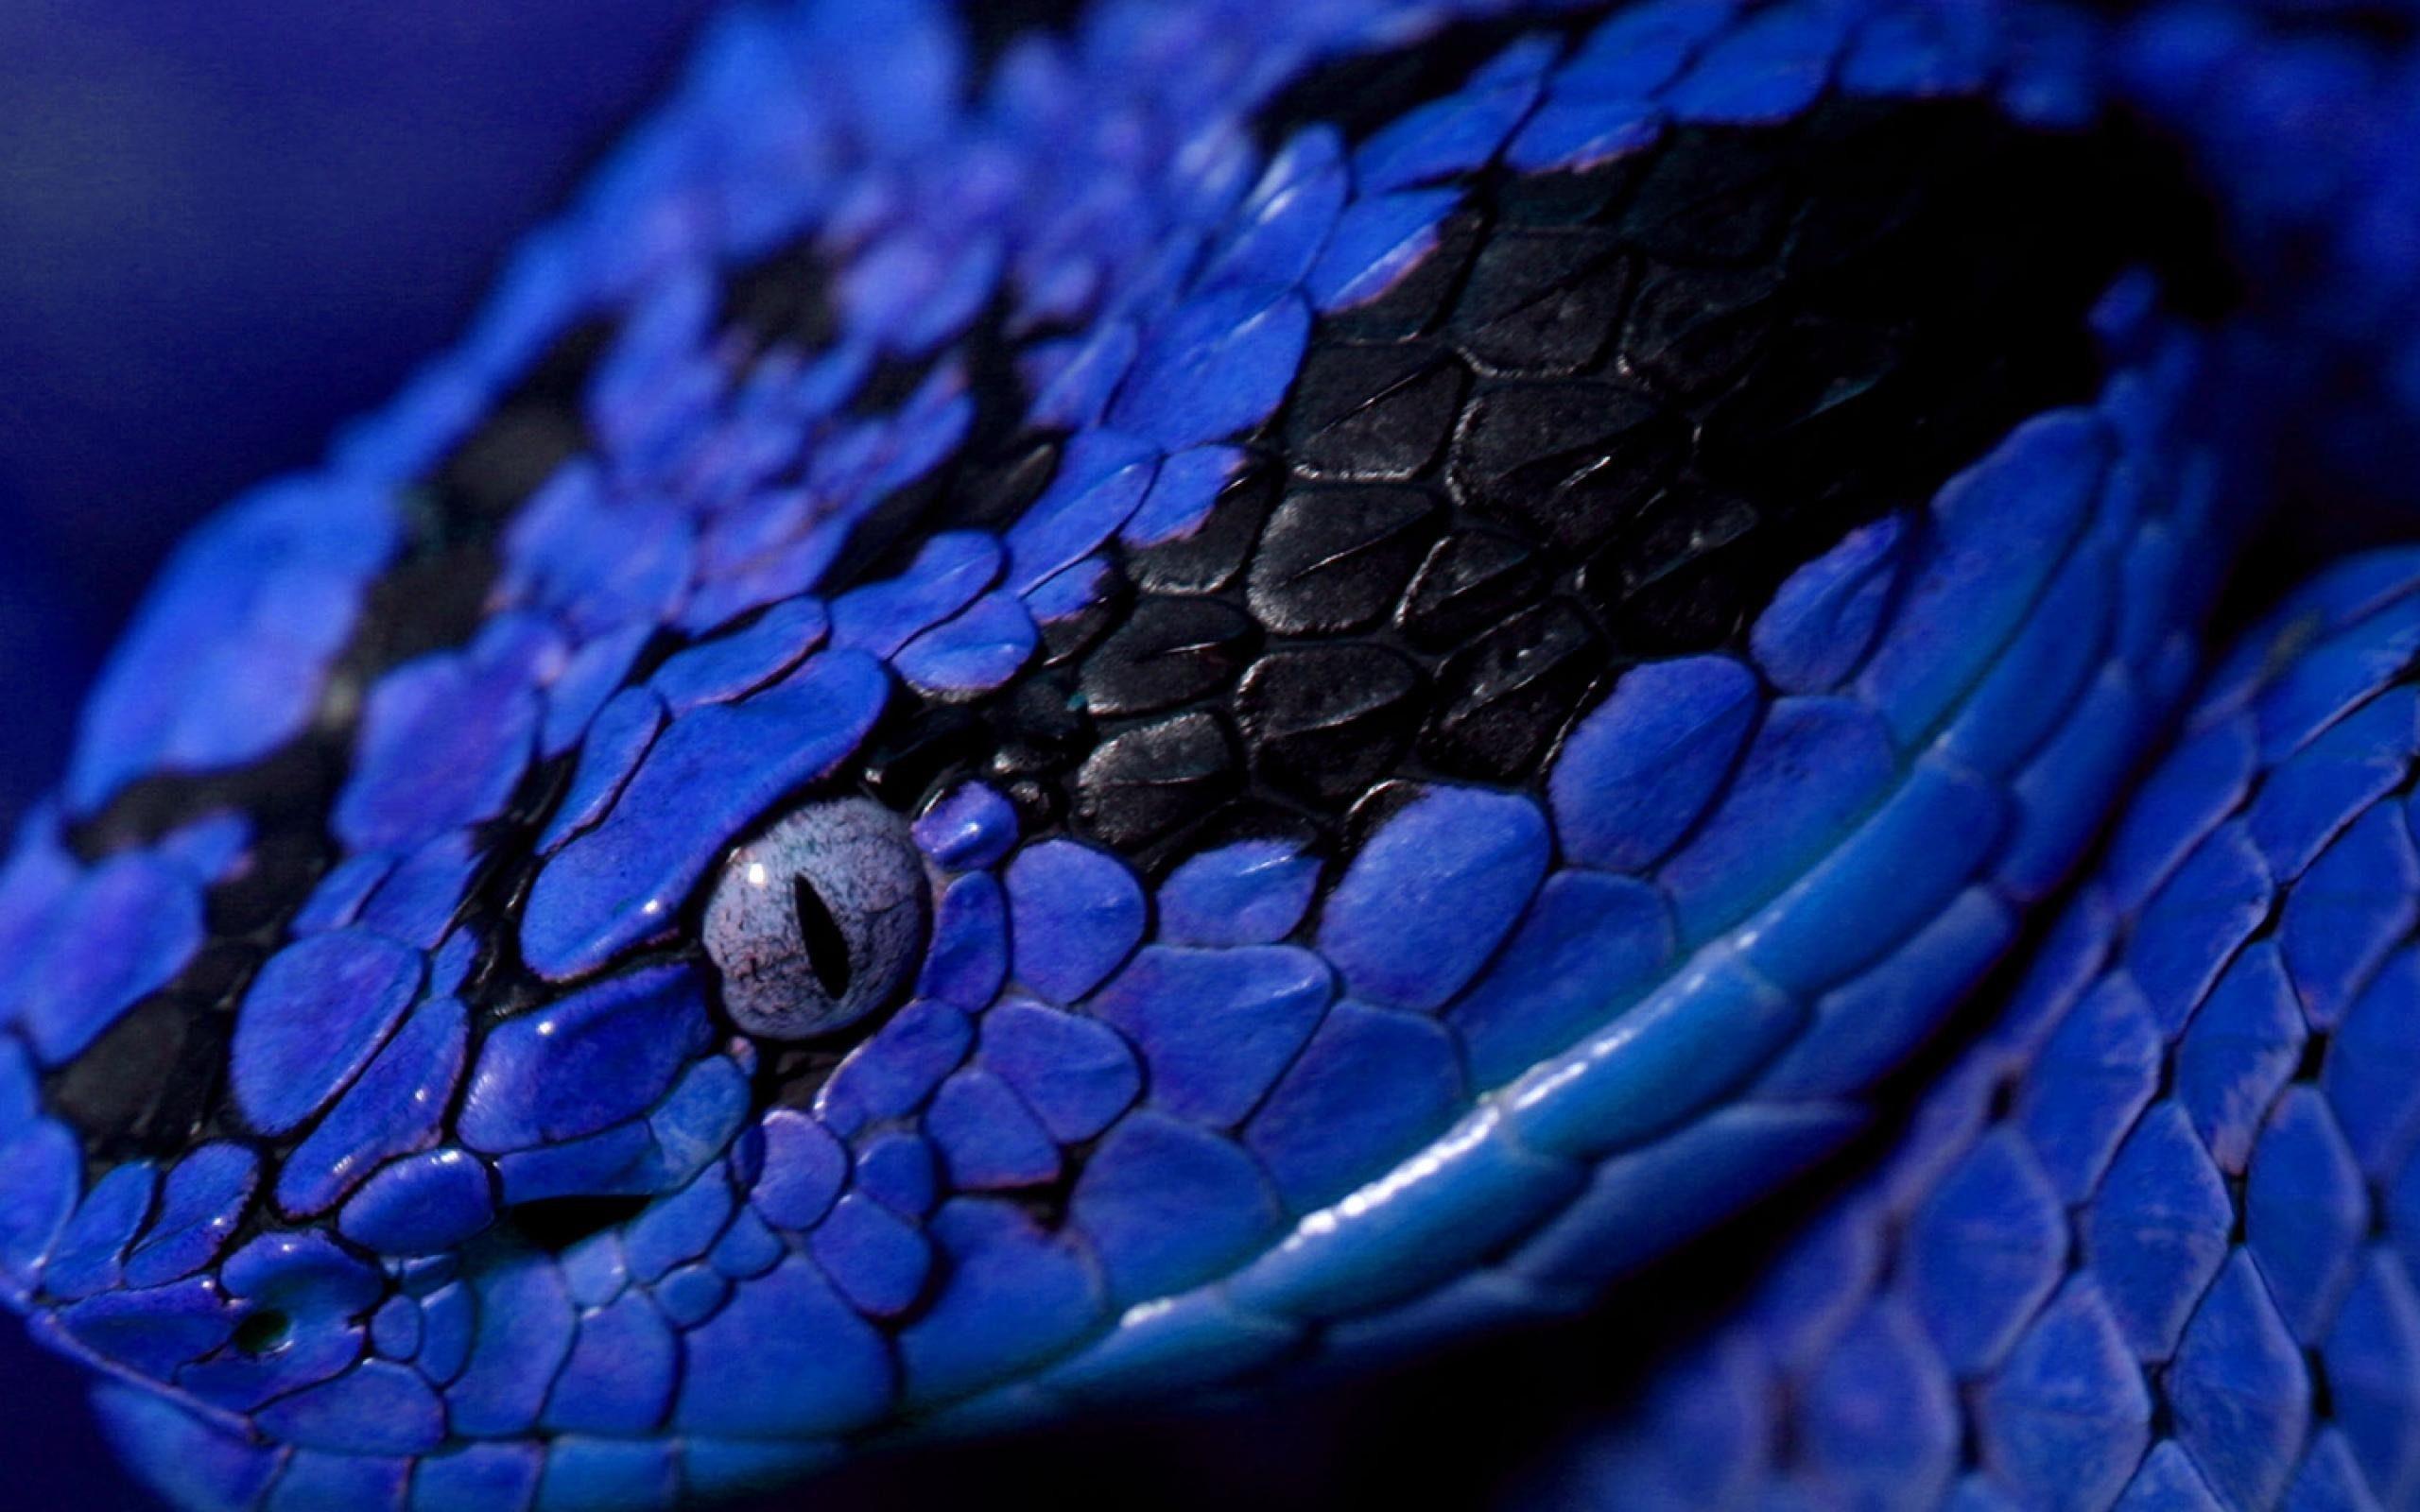 BLUE SNAKES creatures from outer space